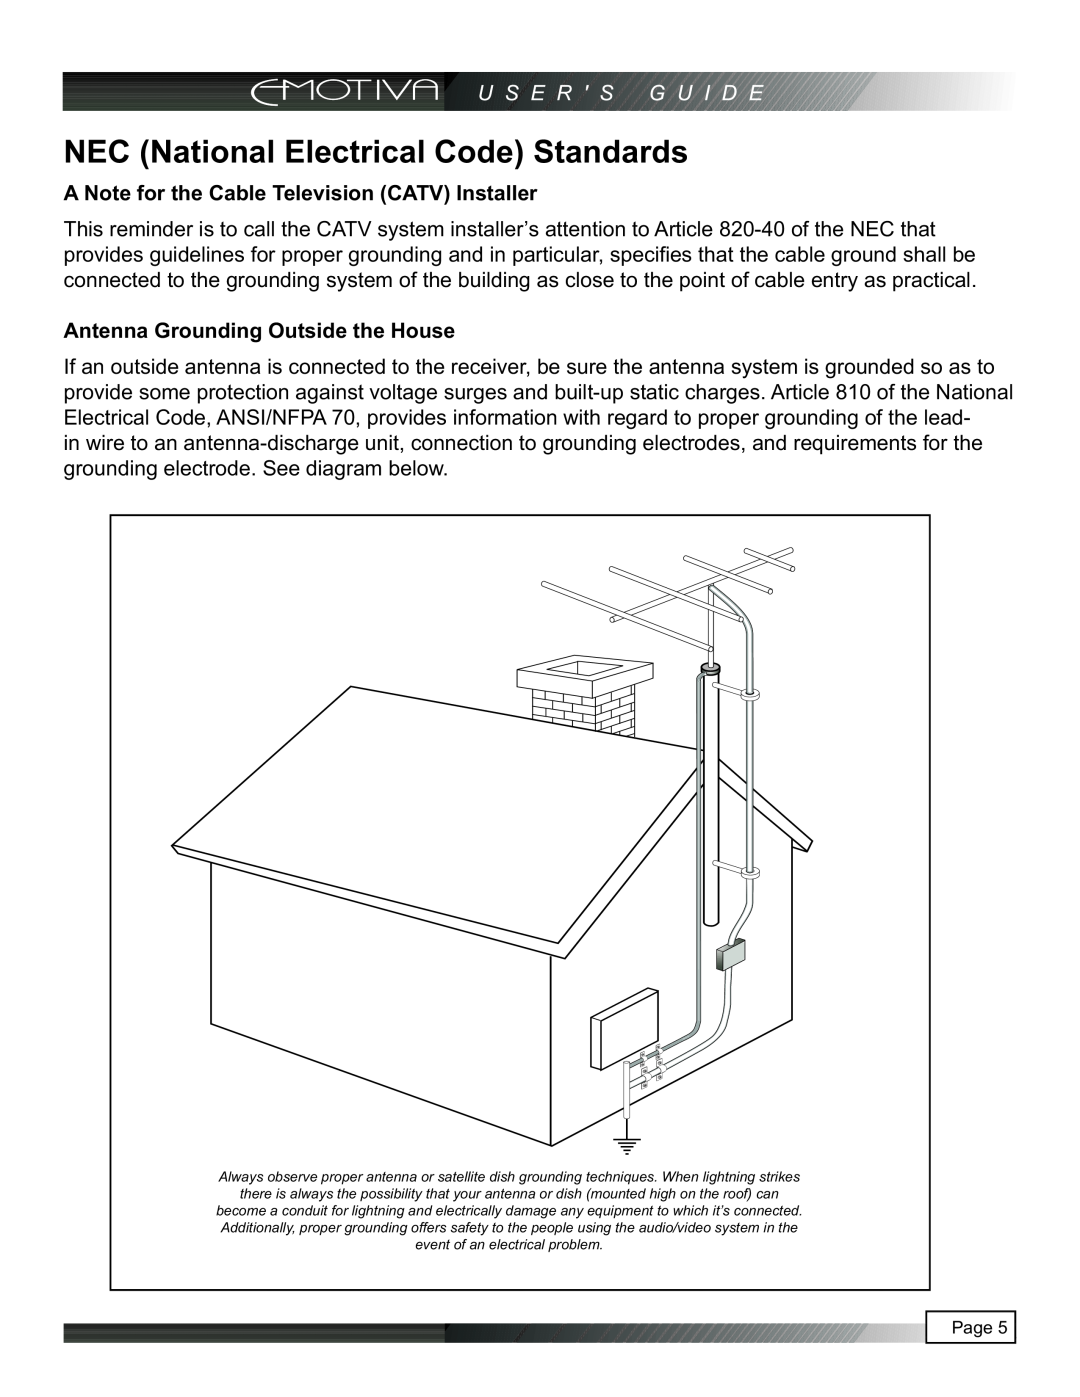 Emotiva UPA-2 manual NEC National Electrical Code Standards, A Note for the Cable Television CATV Installer 